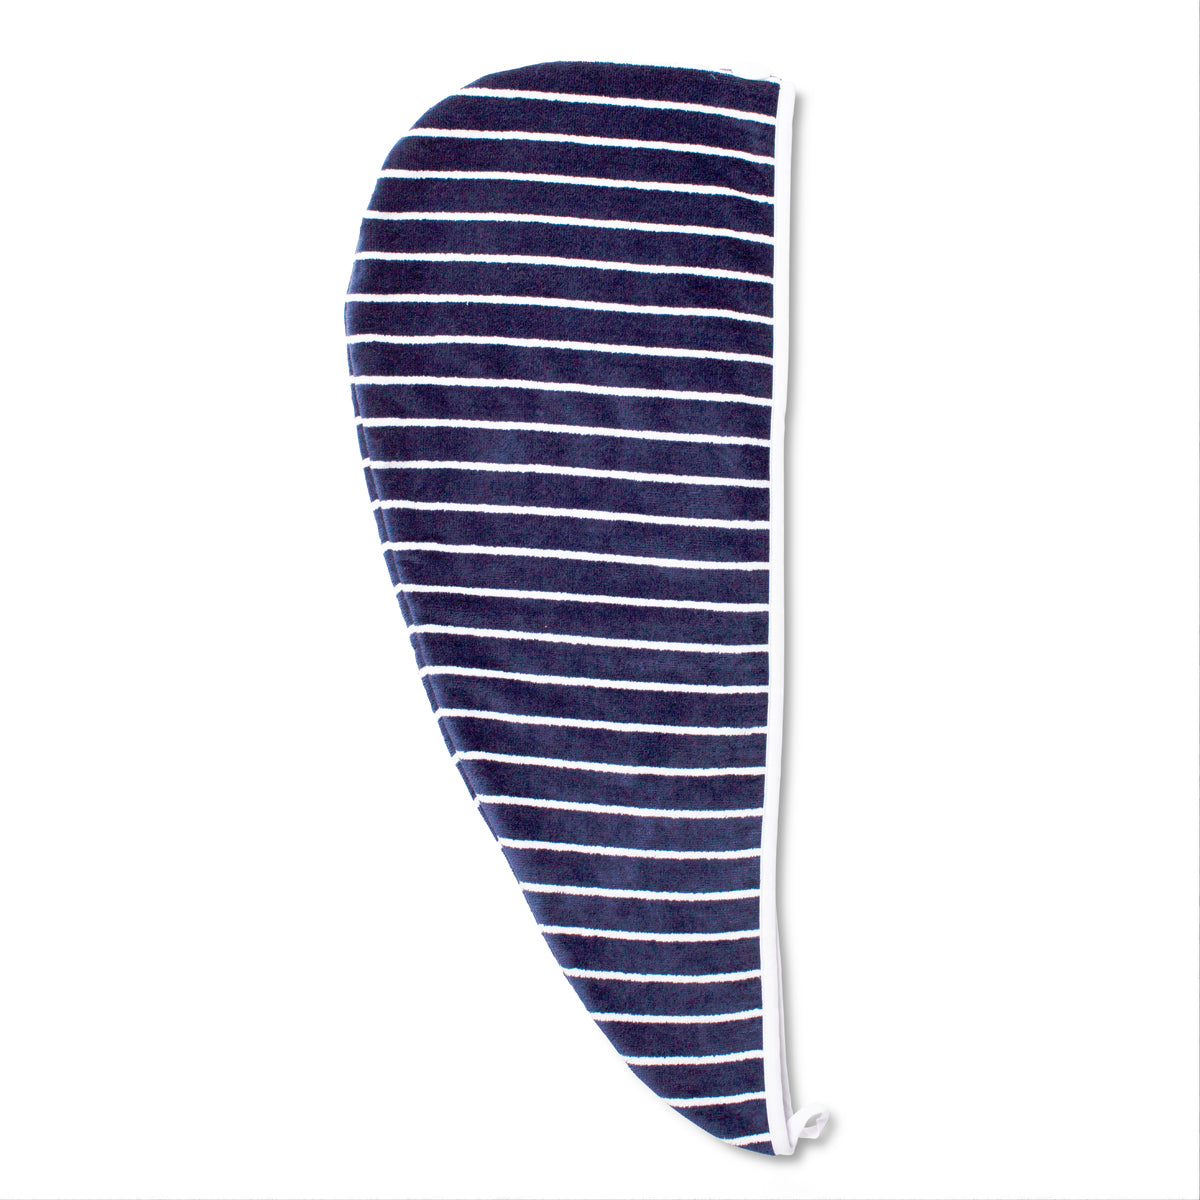 Flat lay of toweling hair wrap in navy and white stripe